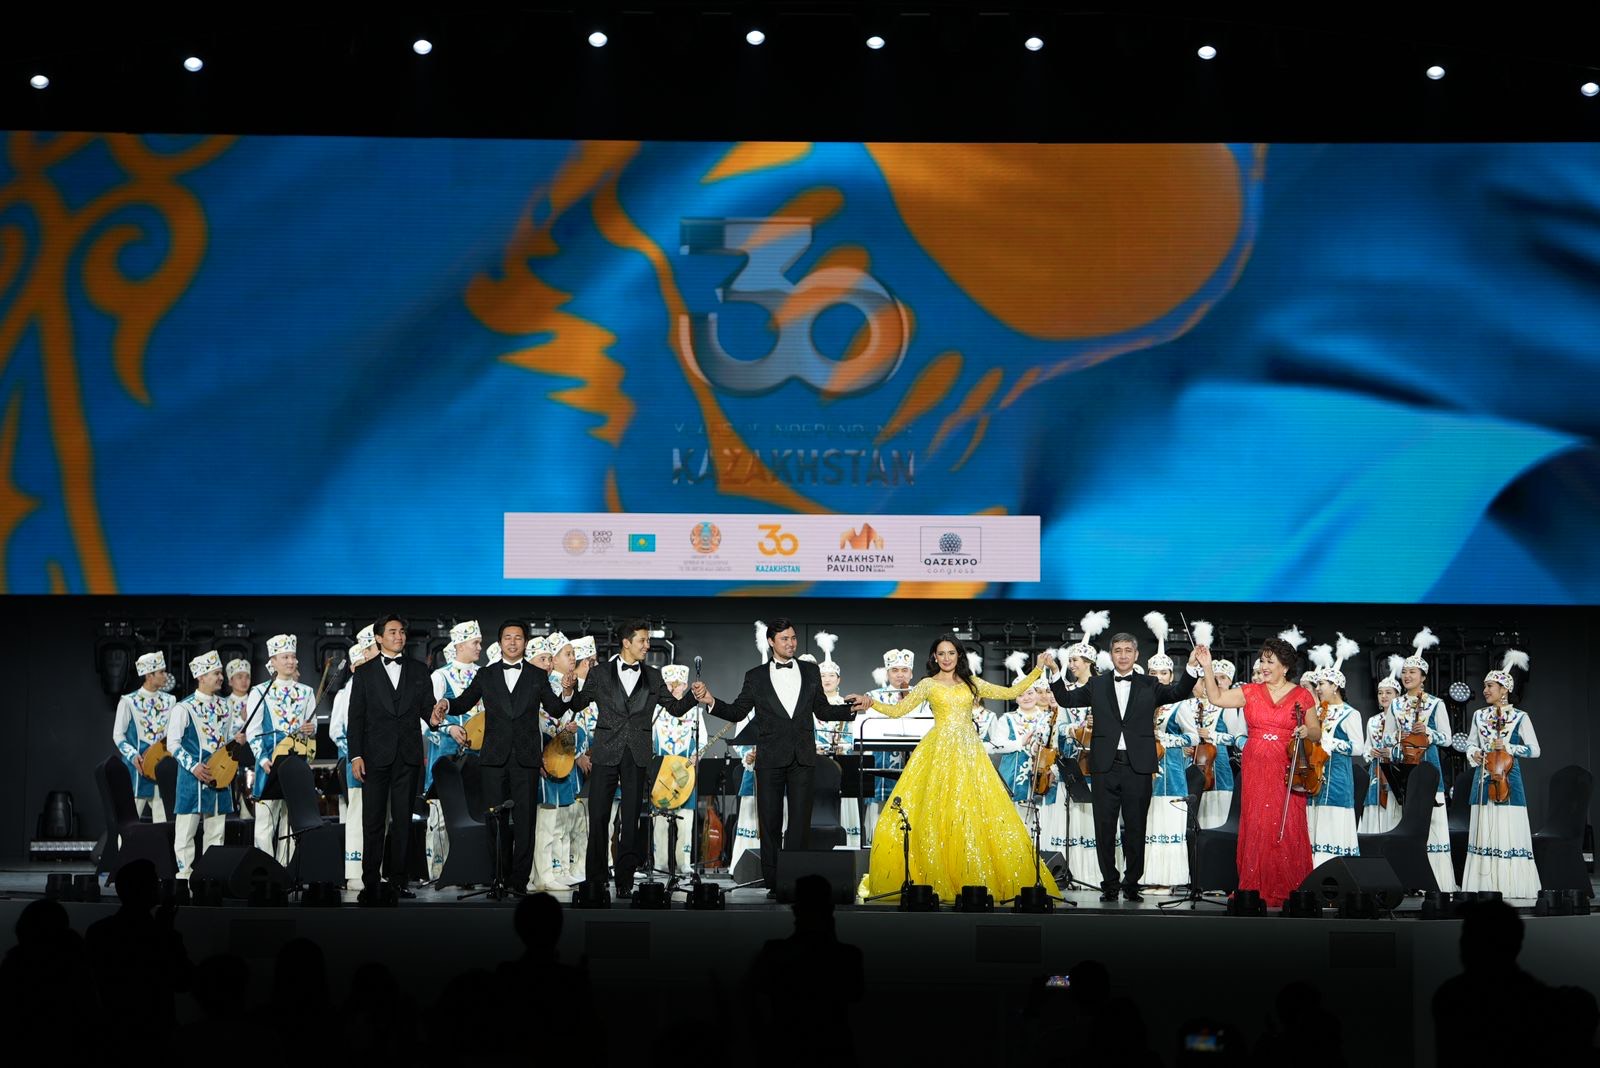 The 30th anniversary of Independence of the Republic of Kazakhstan was celebrated at EXPO 2020 Dubai